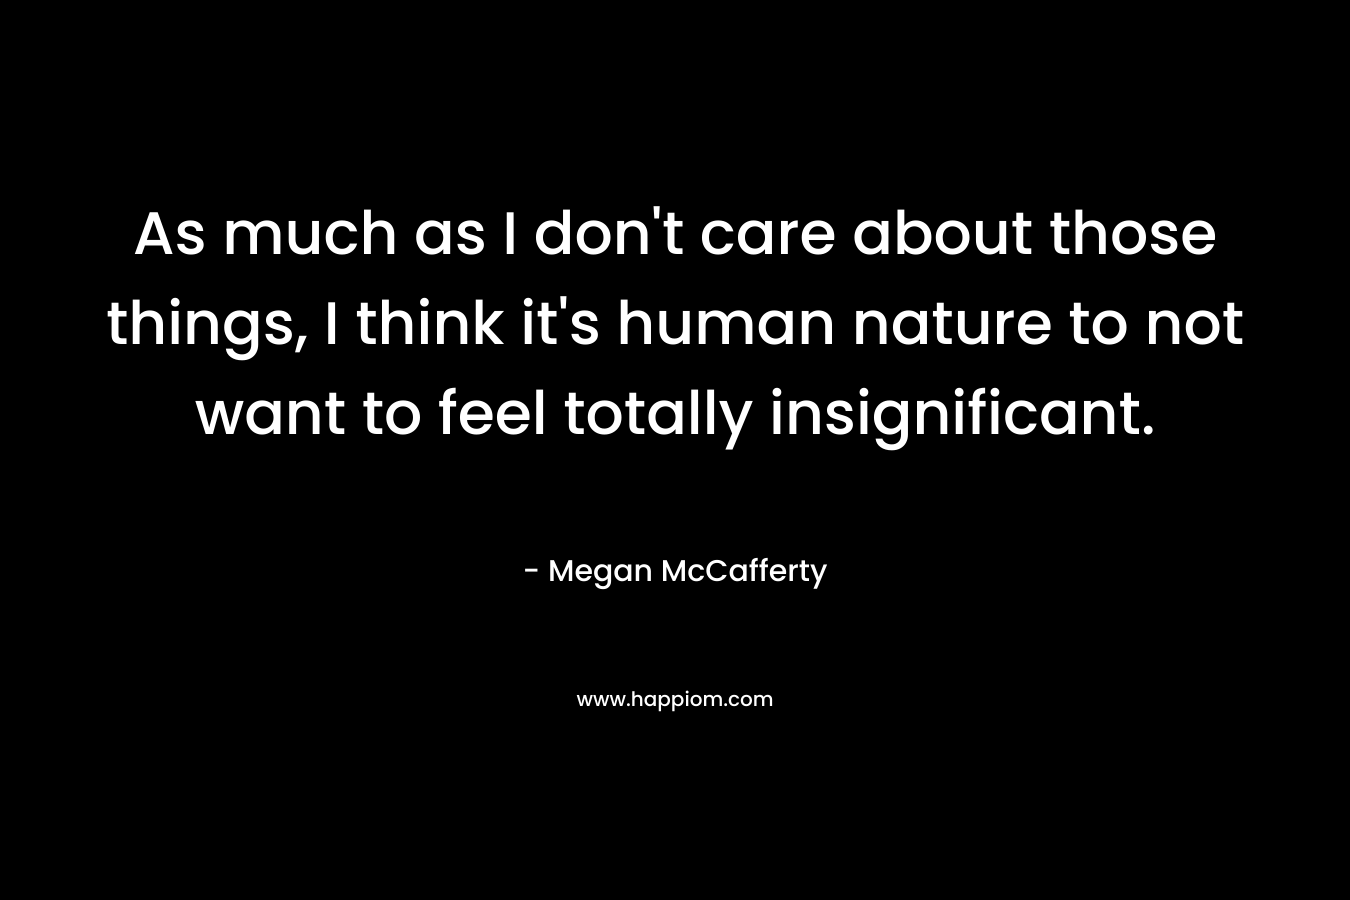 As much as I don’t care about those things, I think it’s human nature to not want to feel totally insignificant. – Megan McCafferty